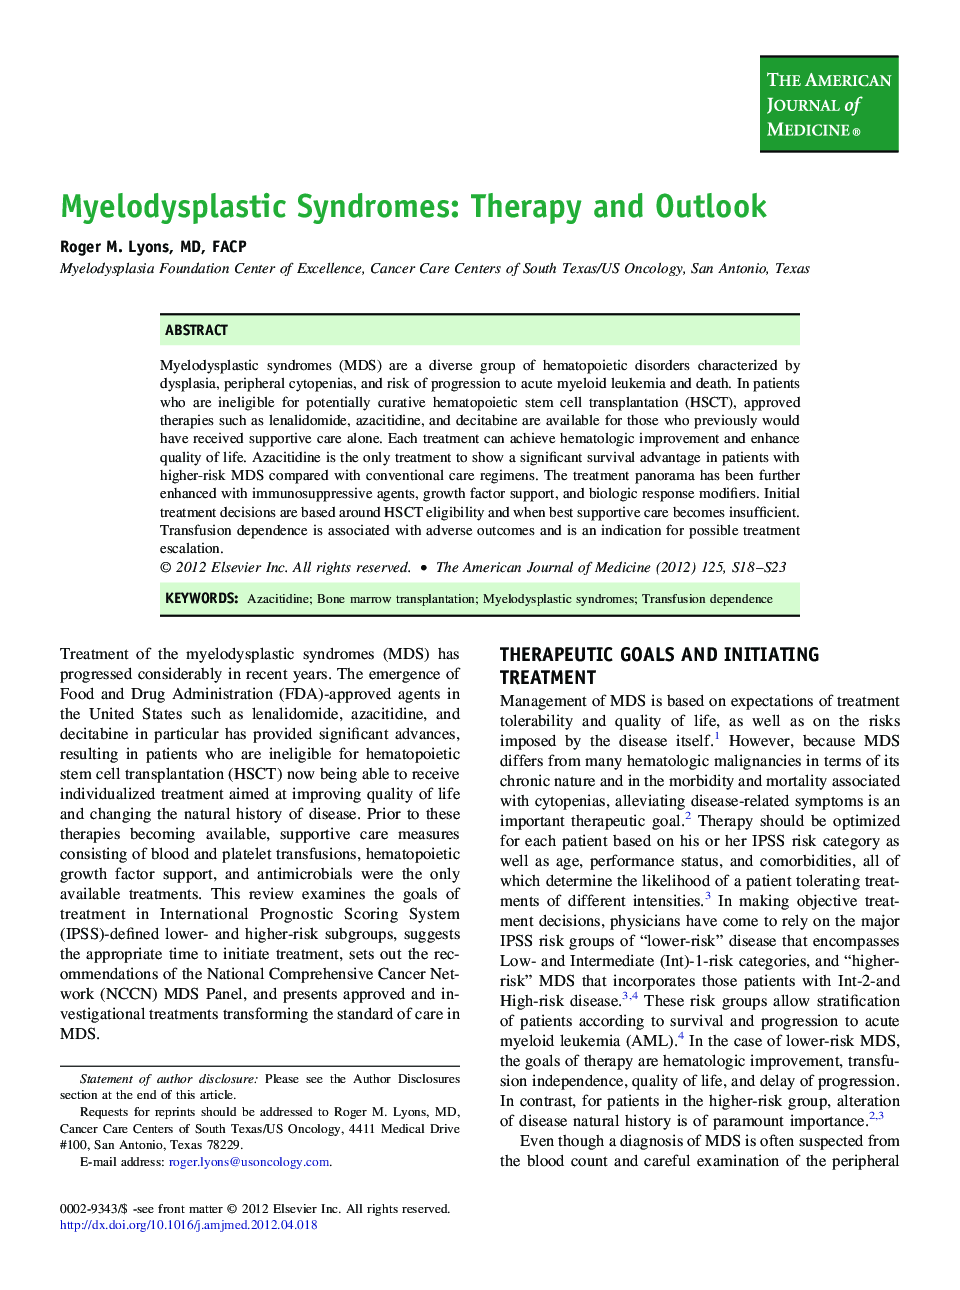 Myelodysplastic Syndromes: Therapy and Outlook 